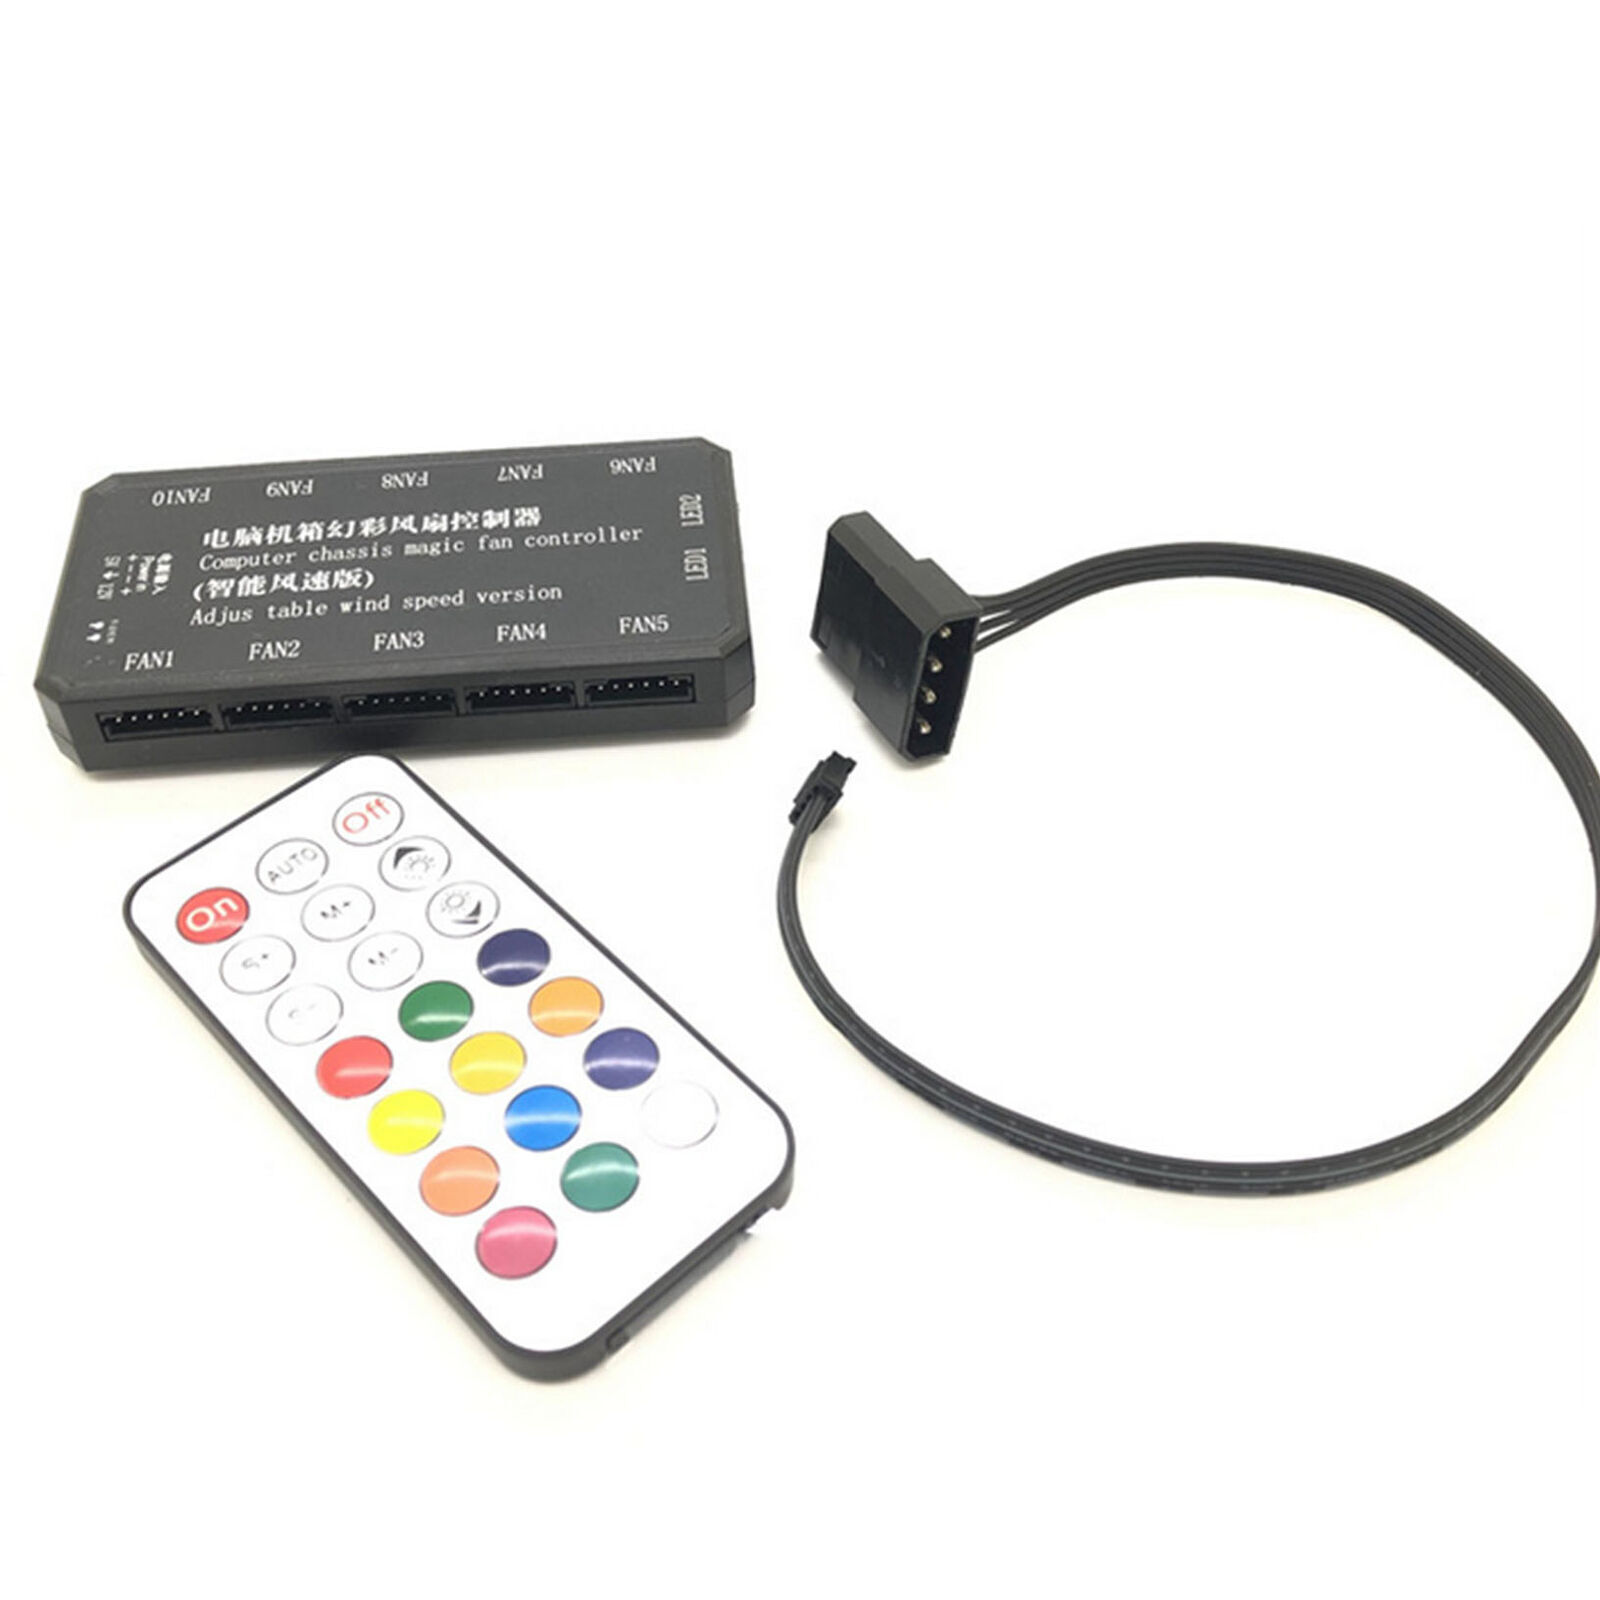 For DC 12V PC Cooling Fan LED RGB Dimmer Controller with RF Remote Control US